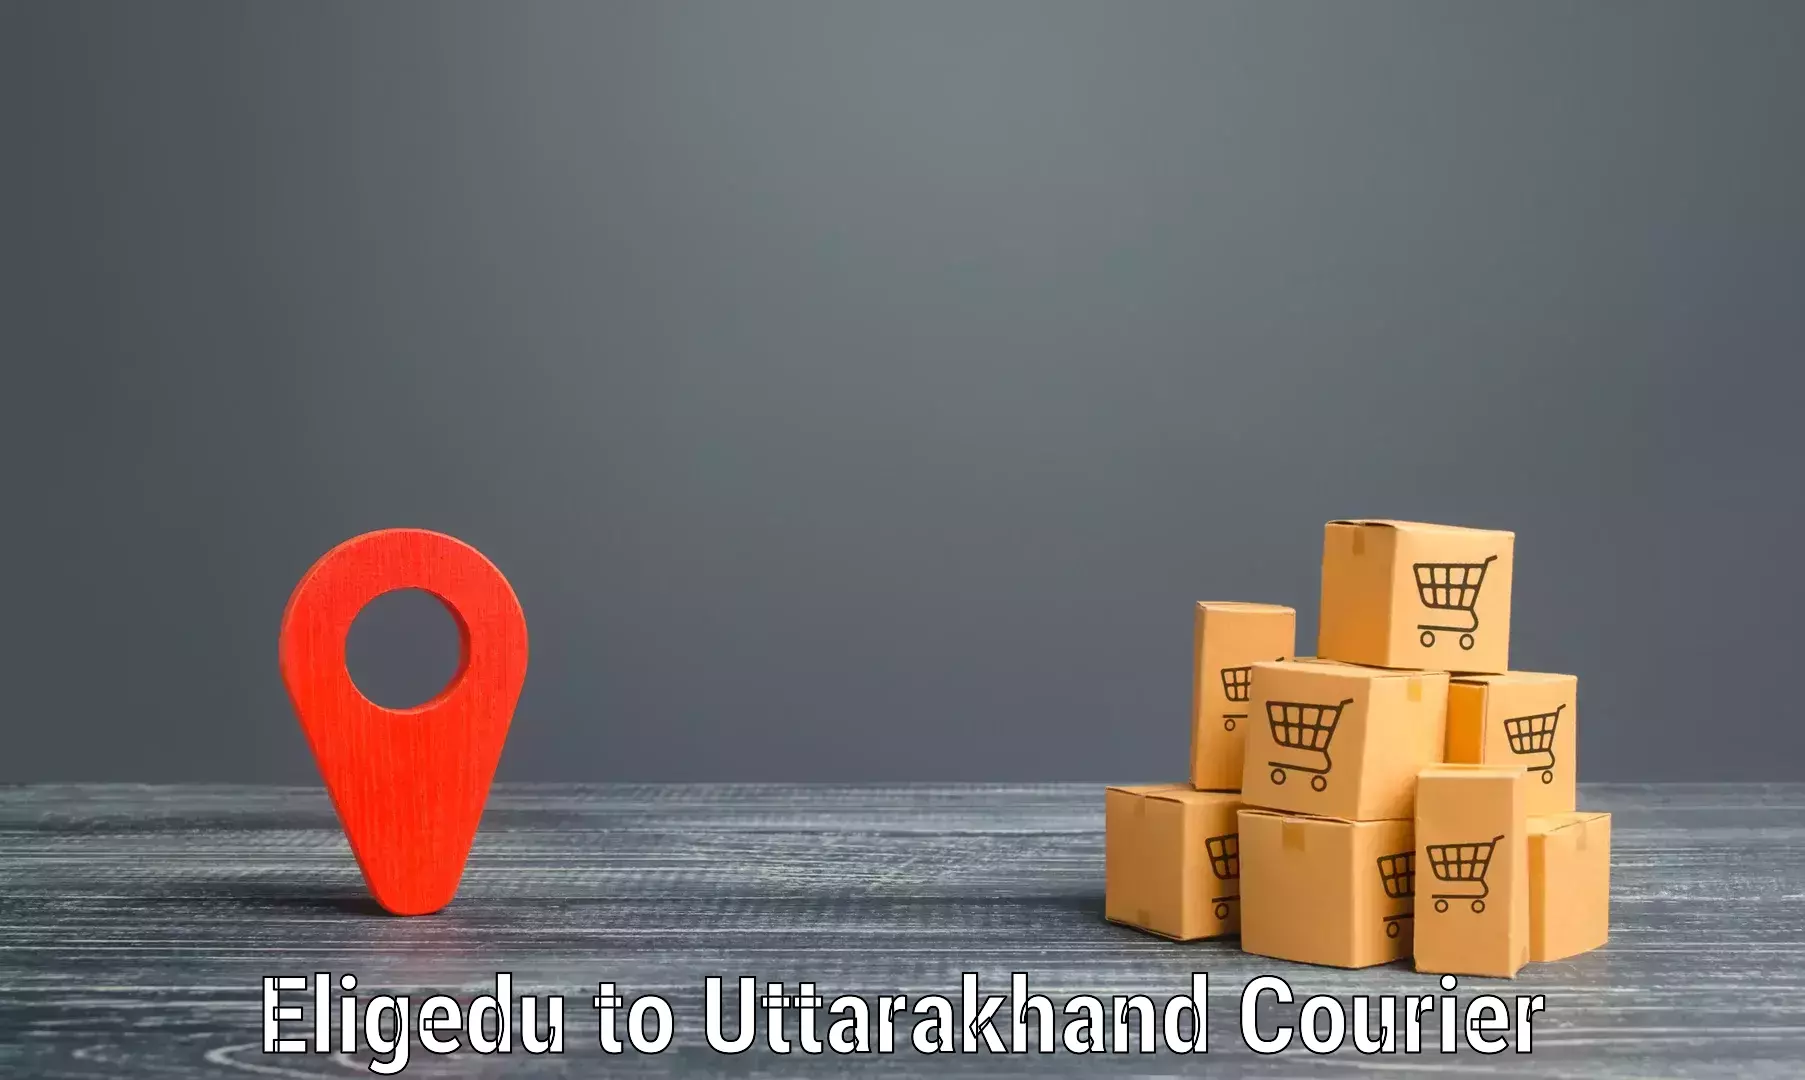 Round-the-clock parcel delivery Eligedu to Didihat